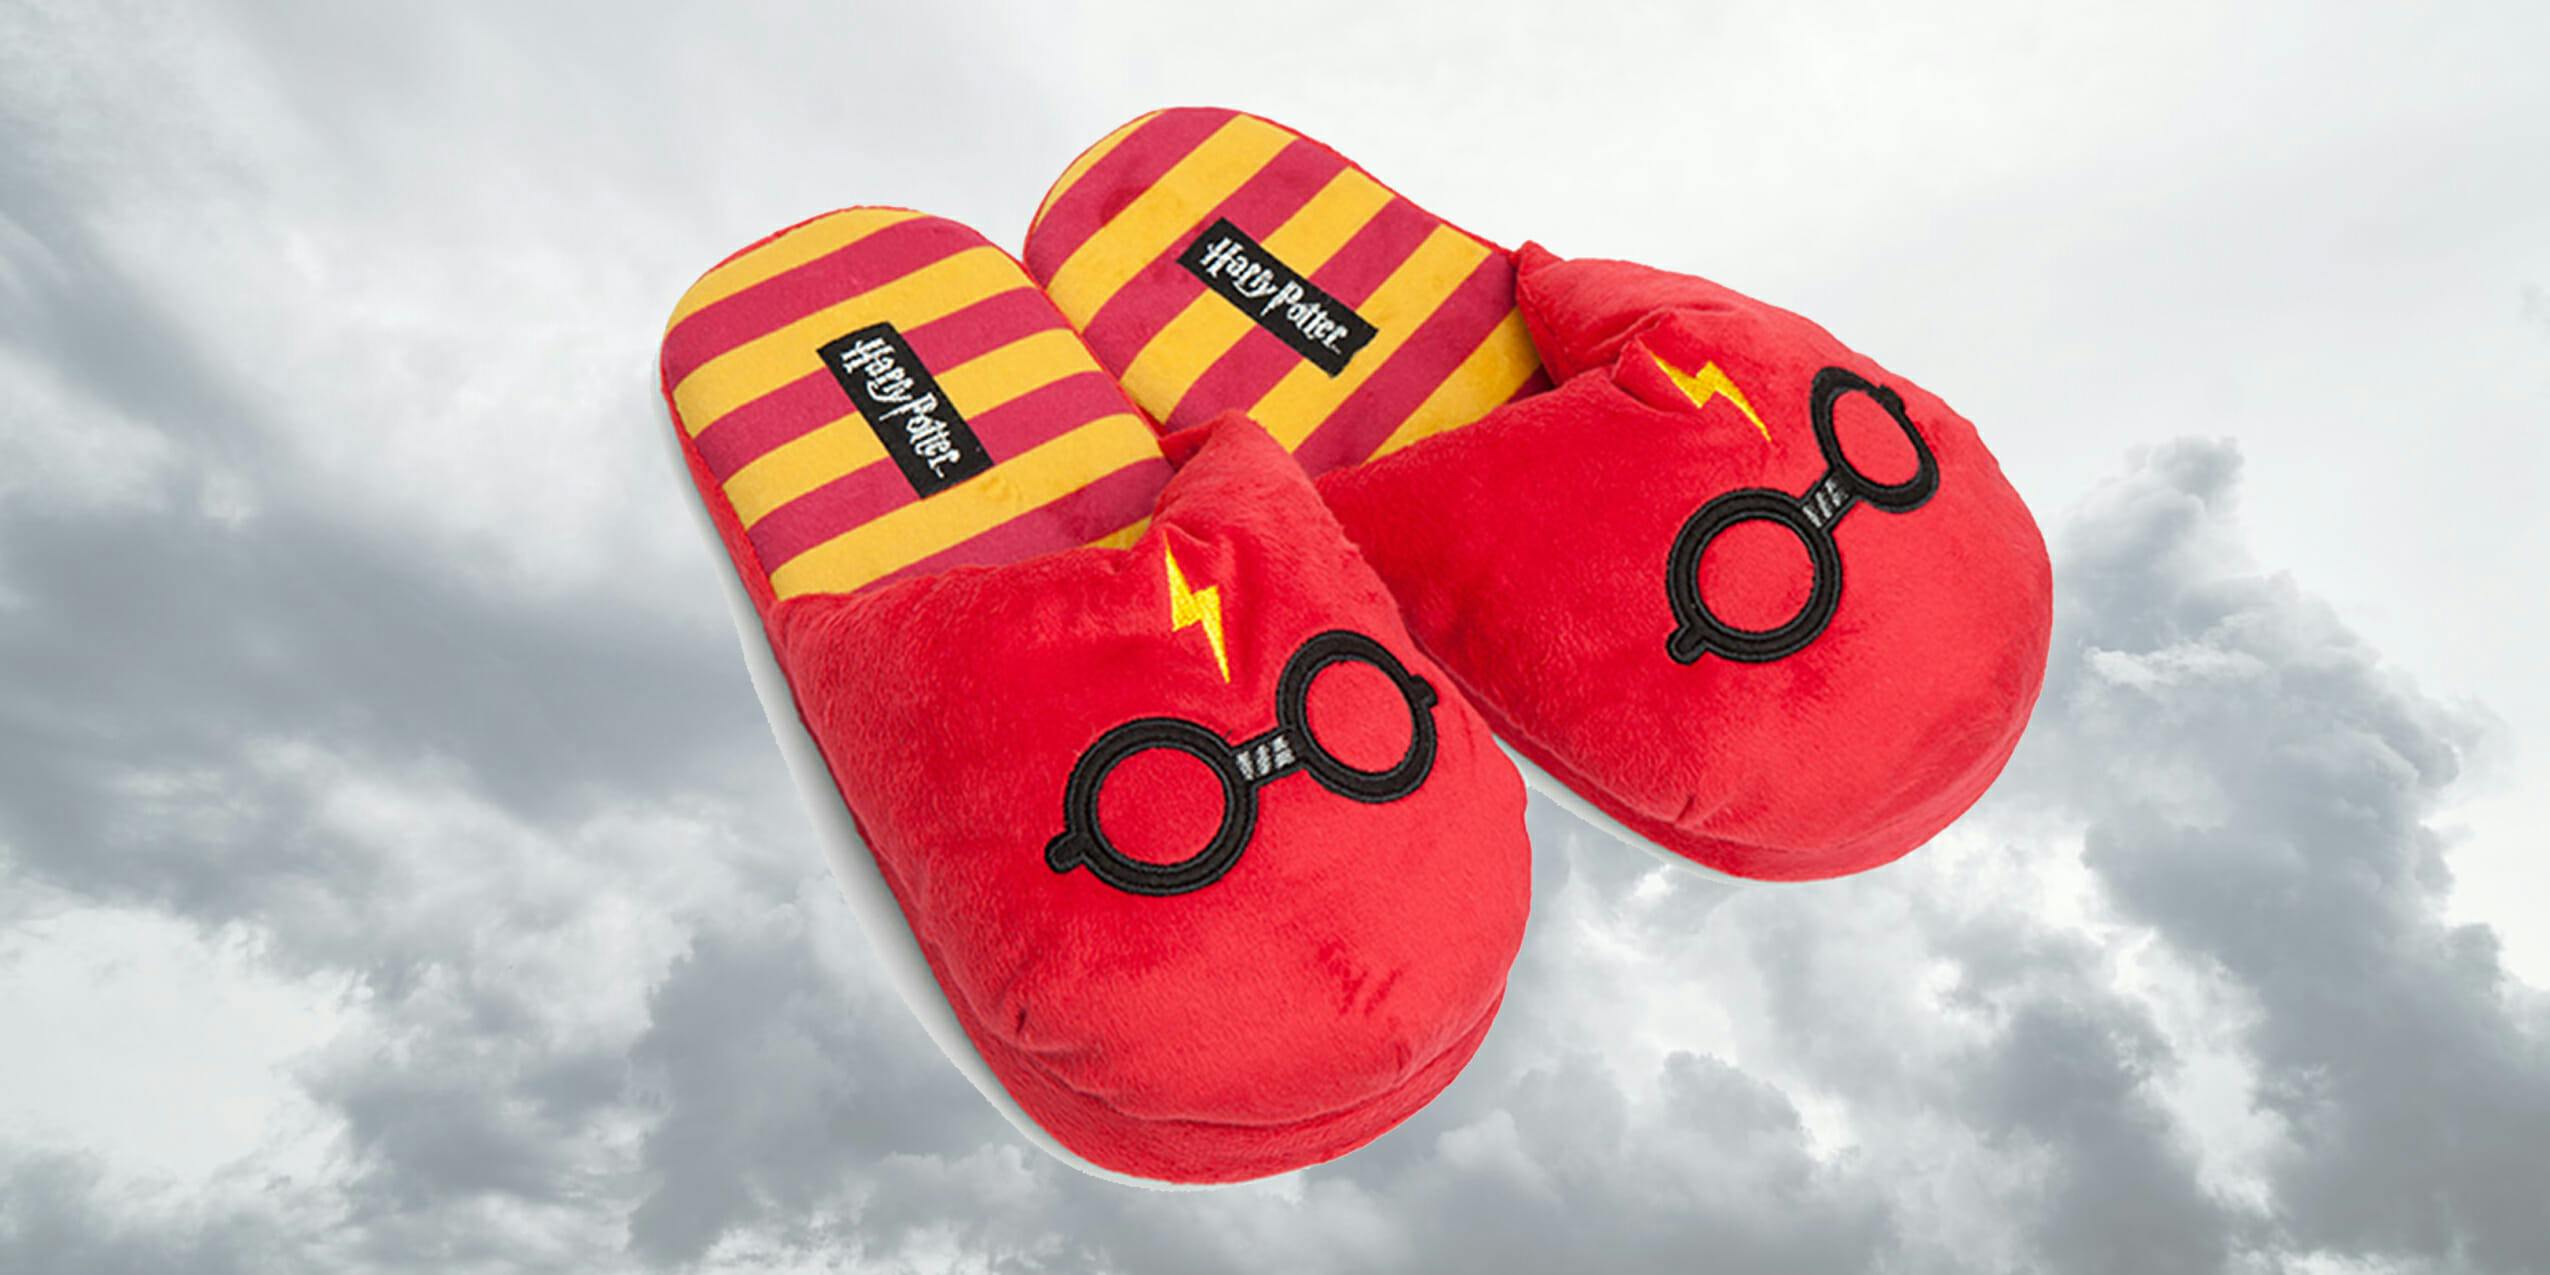 These Harry Potter plush slippers are perfect for midnight shenanigans